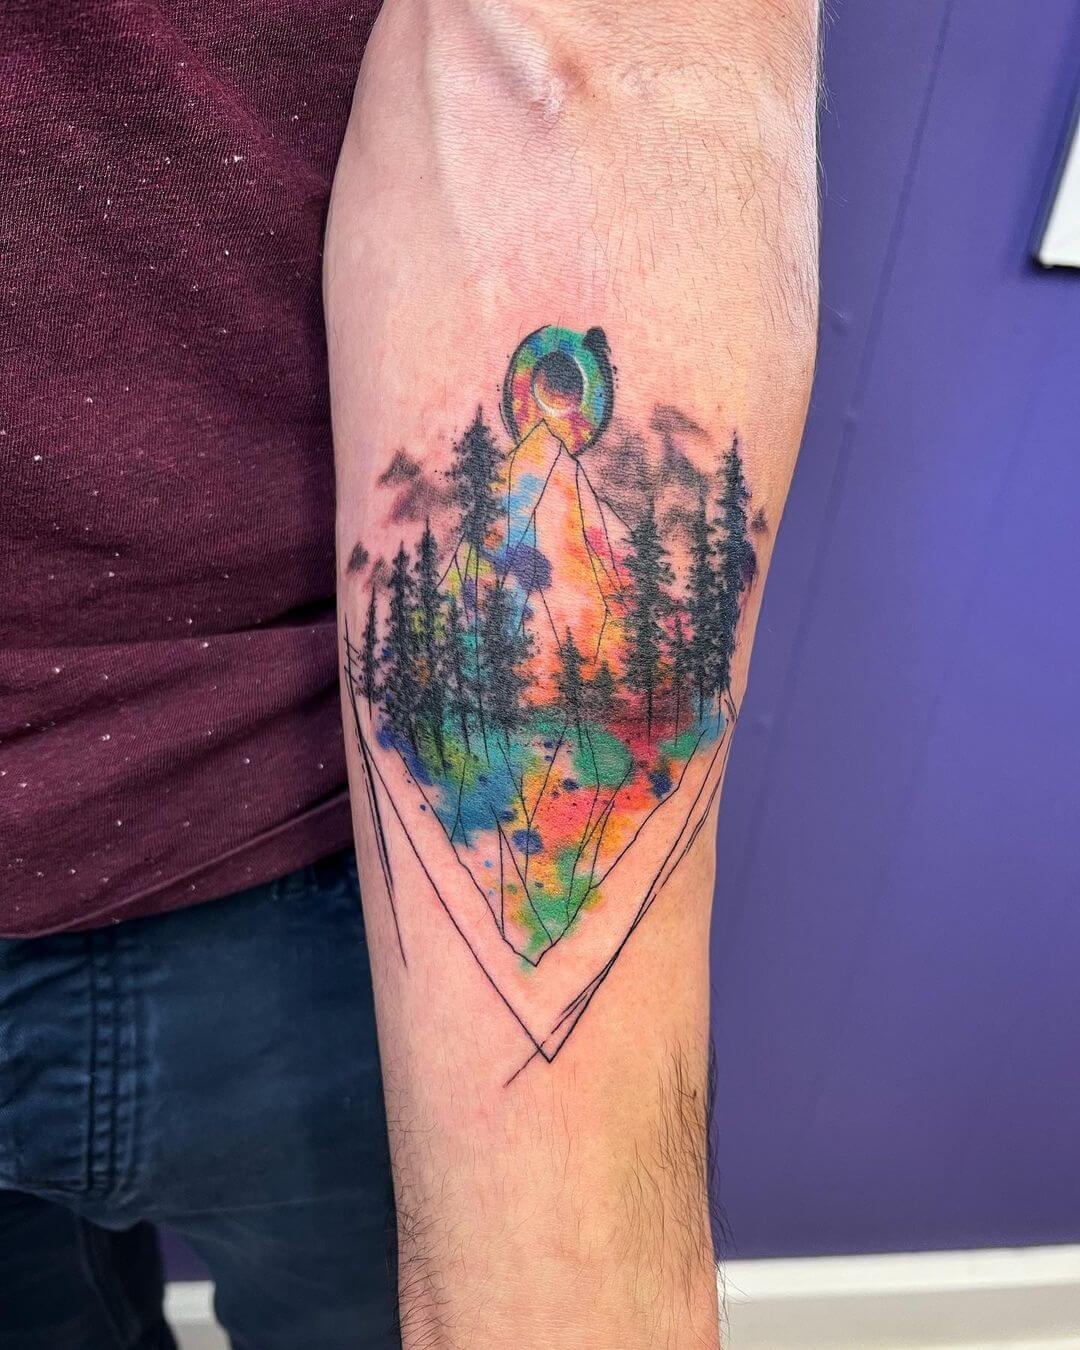 Adorable Geometric Forest Tattoo-